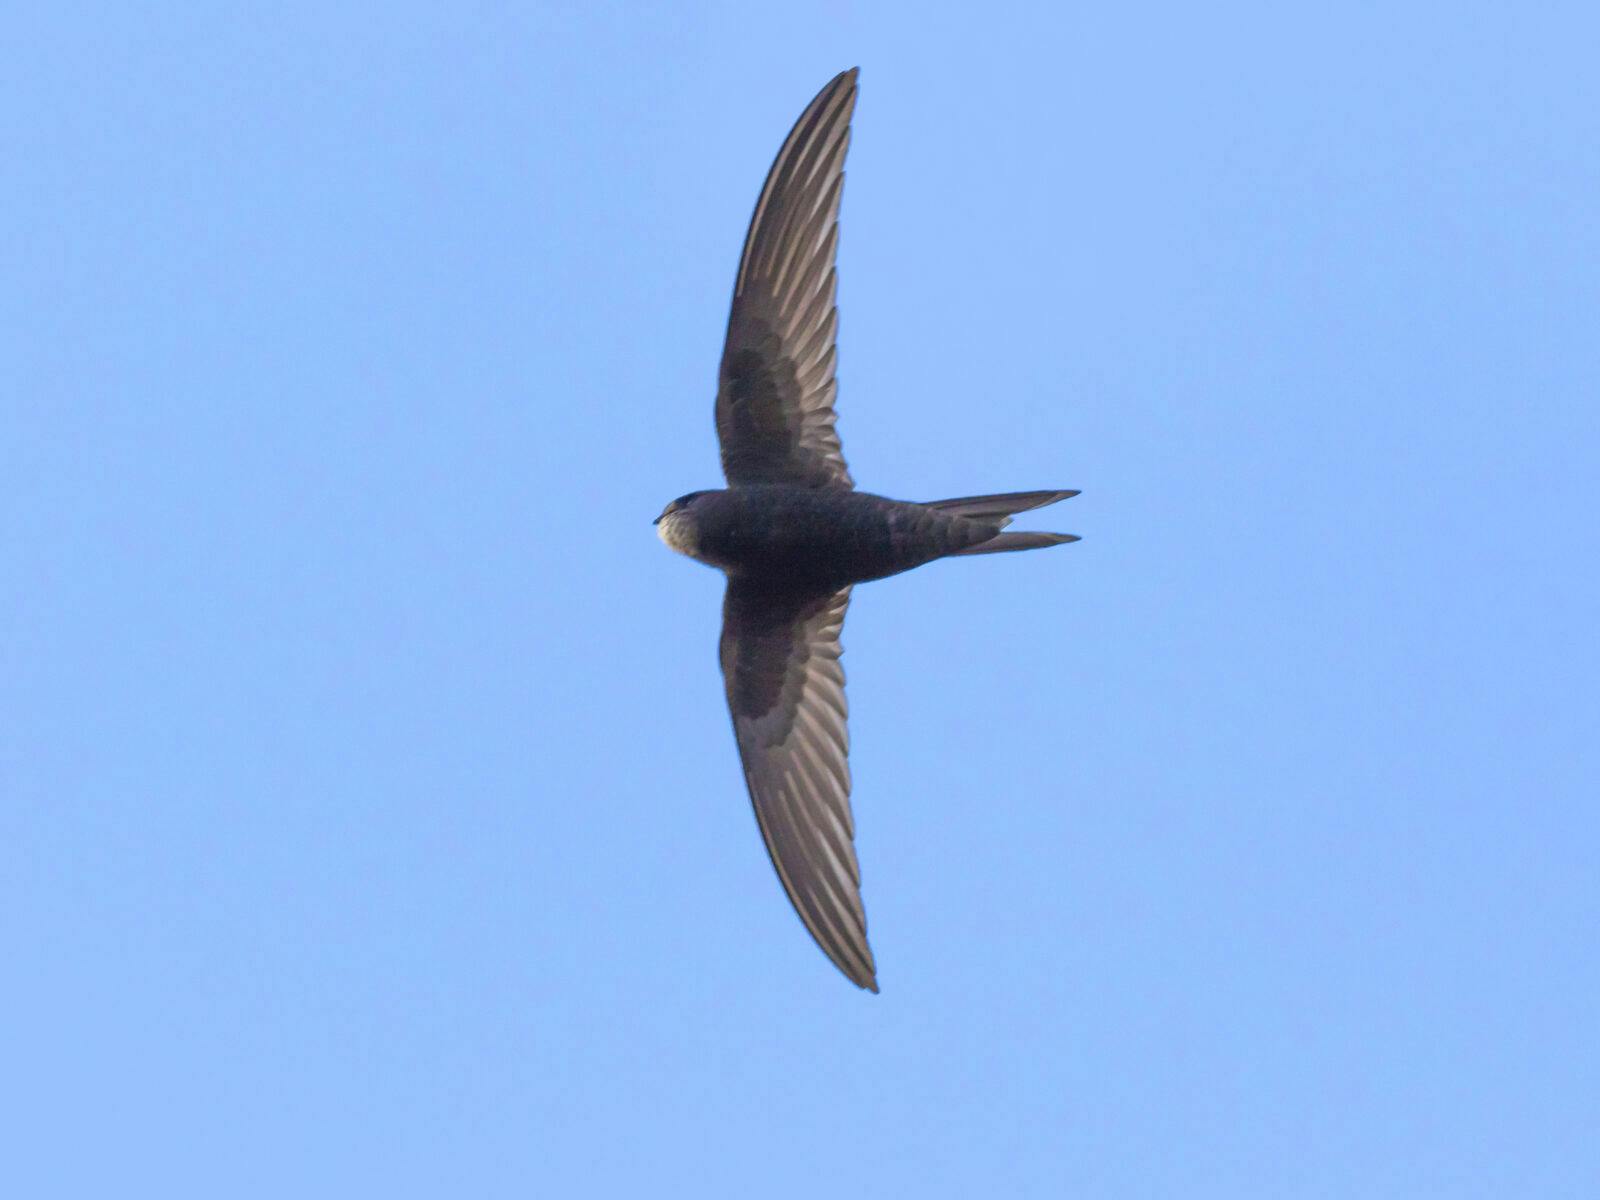 A common swift in the flight over homburg